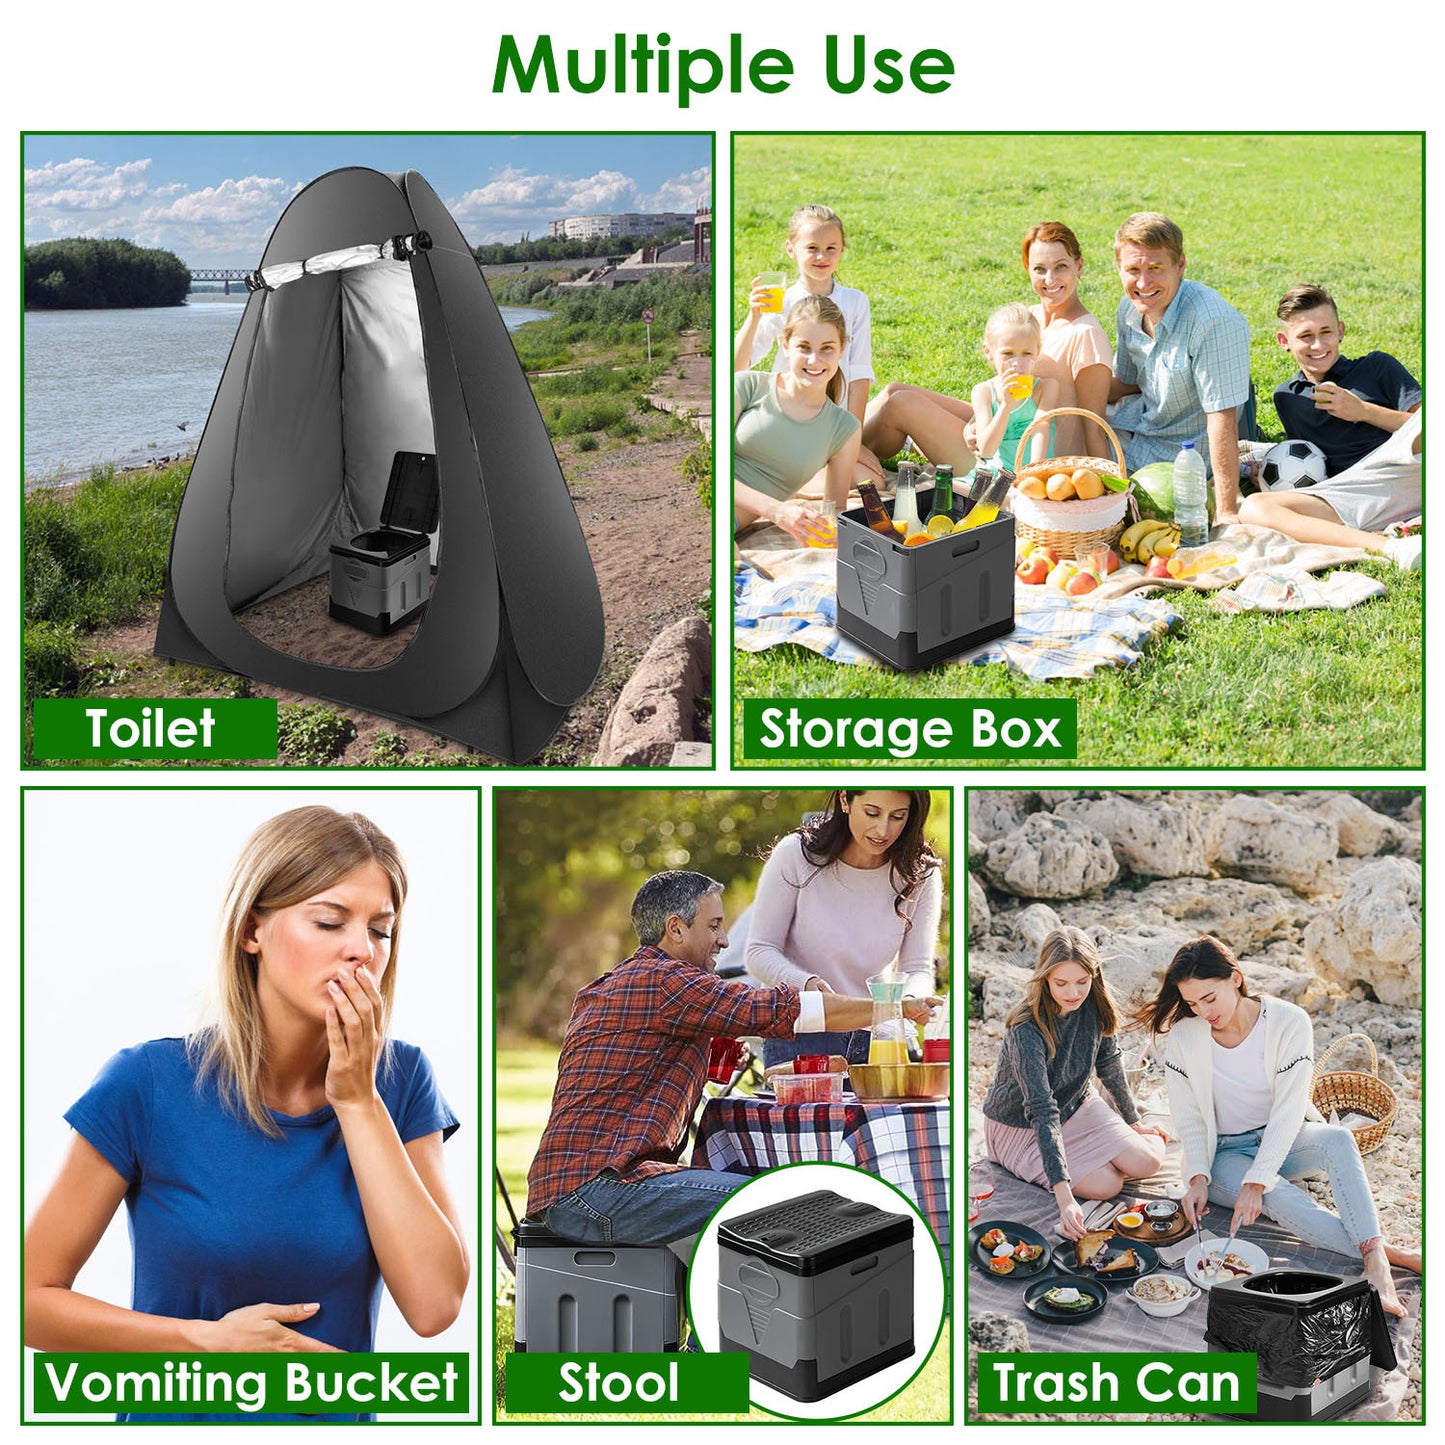 Portable Toilet for Car Camping Boating Hiking Outdoor Travel Potty with Carry Bag Foldable Emergency Toilet with Lid Trash Bags